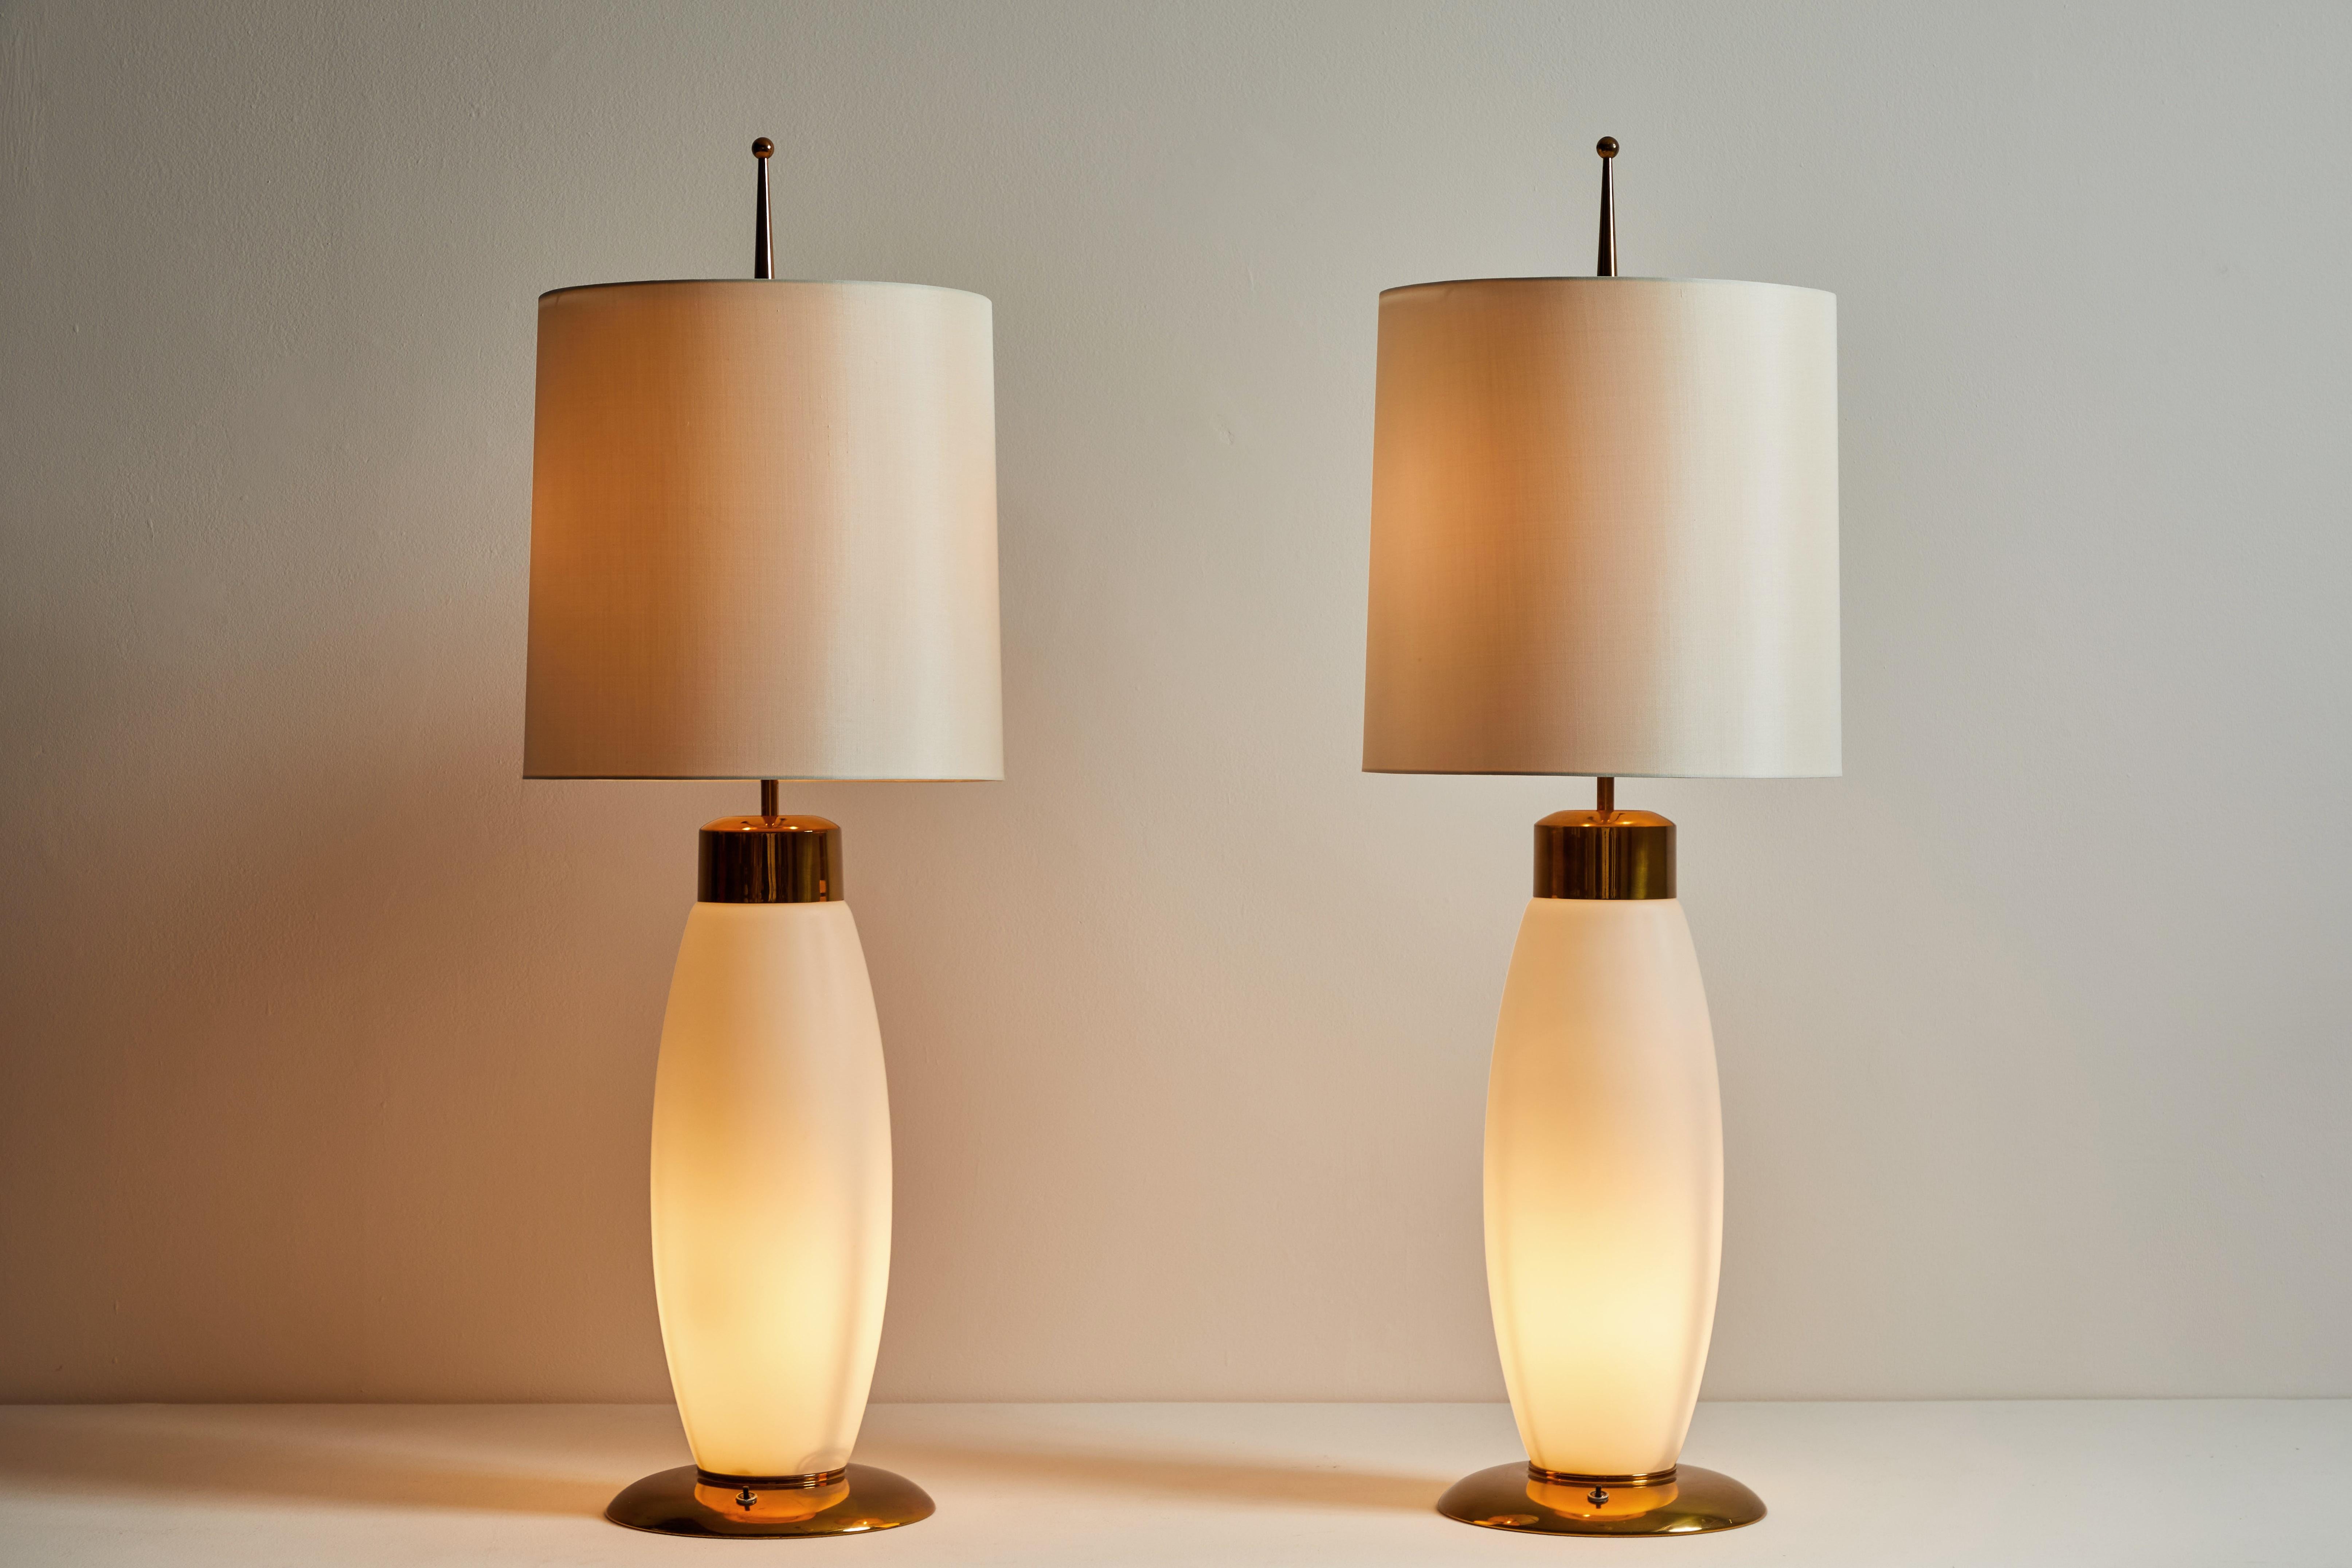 Pair of Table Lamps by Stilnovo. Manufactured in Italy, circa 1960s. Opaline glass, brass, custom silk shades. Wired for U.S standards. We recommend 3 E26 40w maximum bulbs per fixture. Bulbs provided as a one time courtesy. Retains original